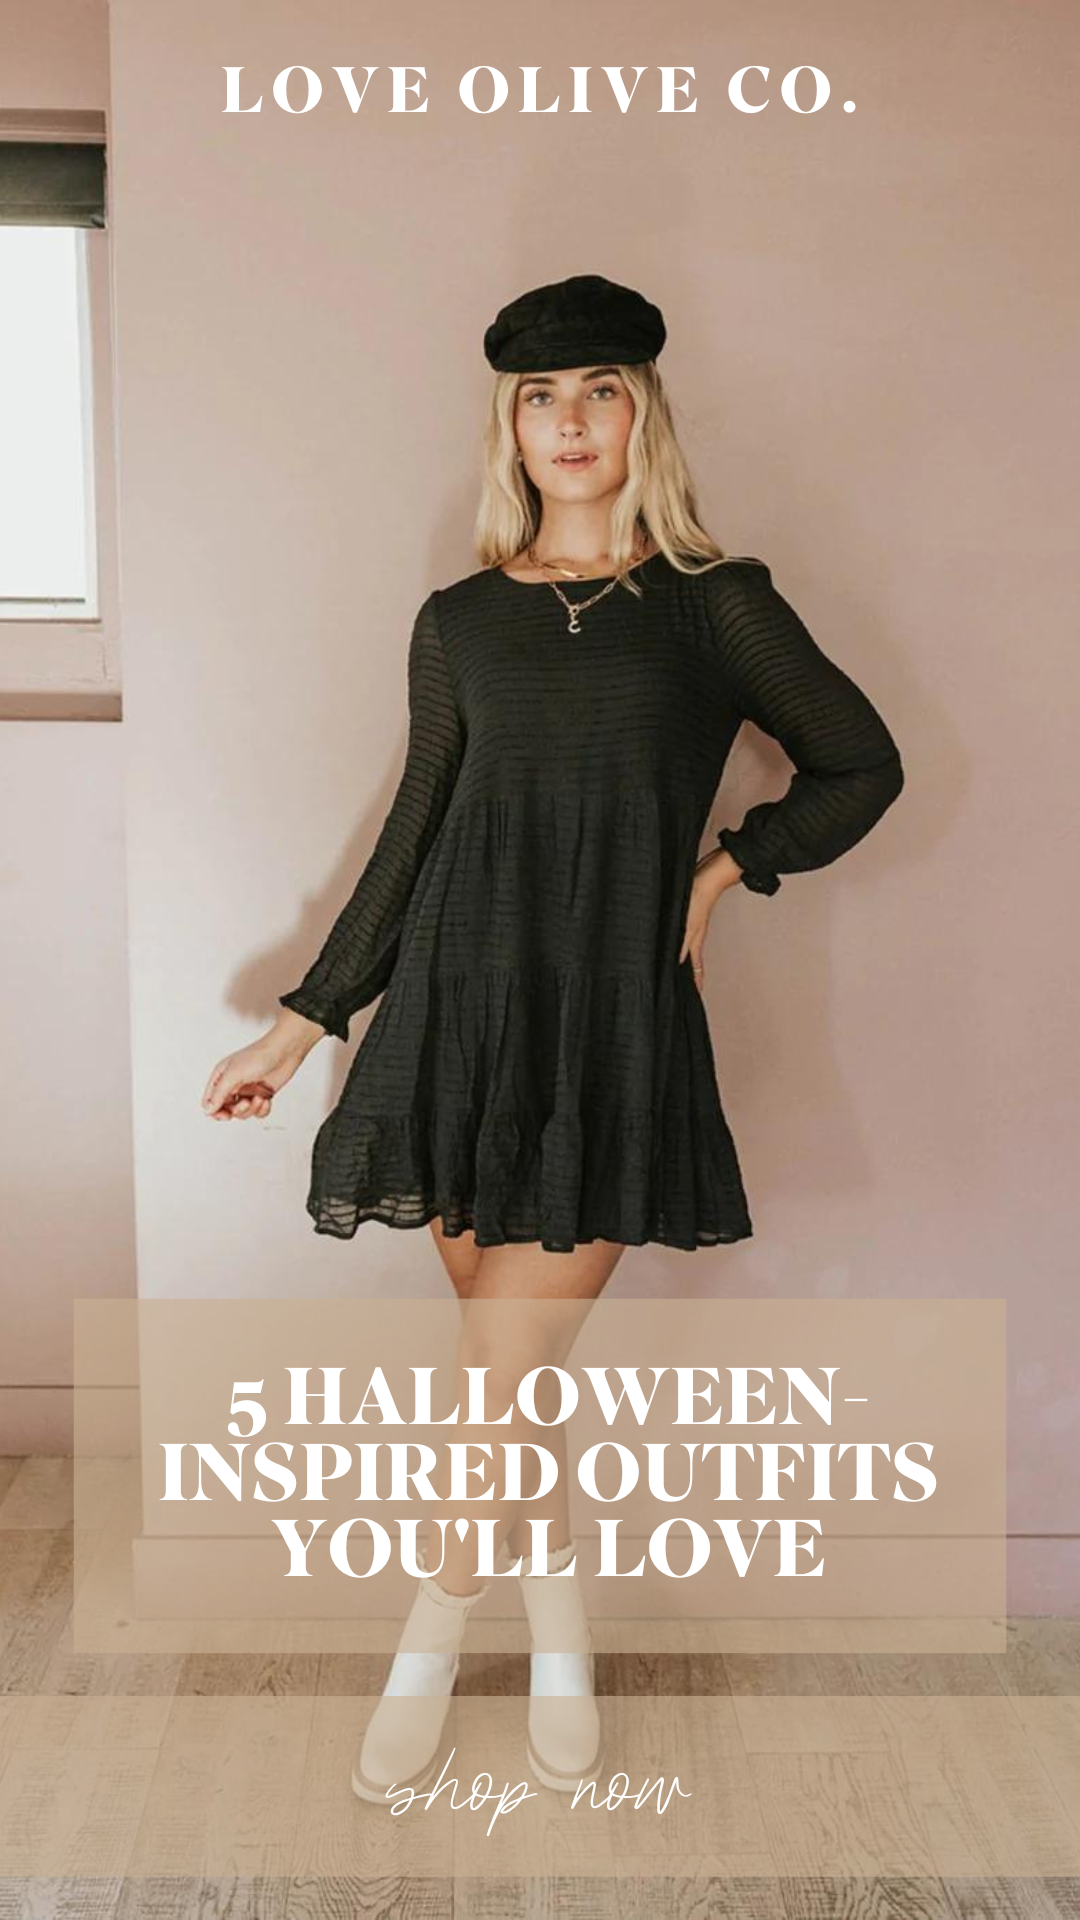 5 halloween-inspired outfits you'll love. www.loveoliveco.com